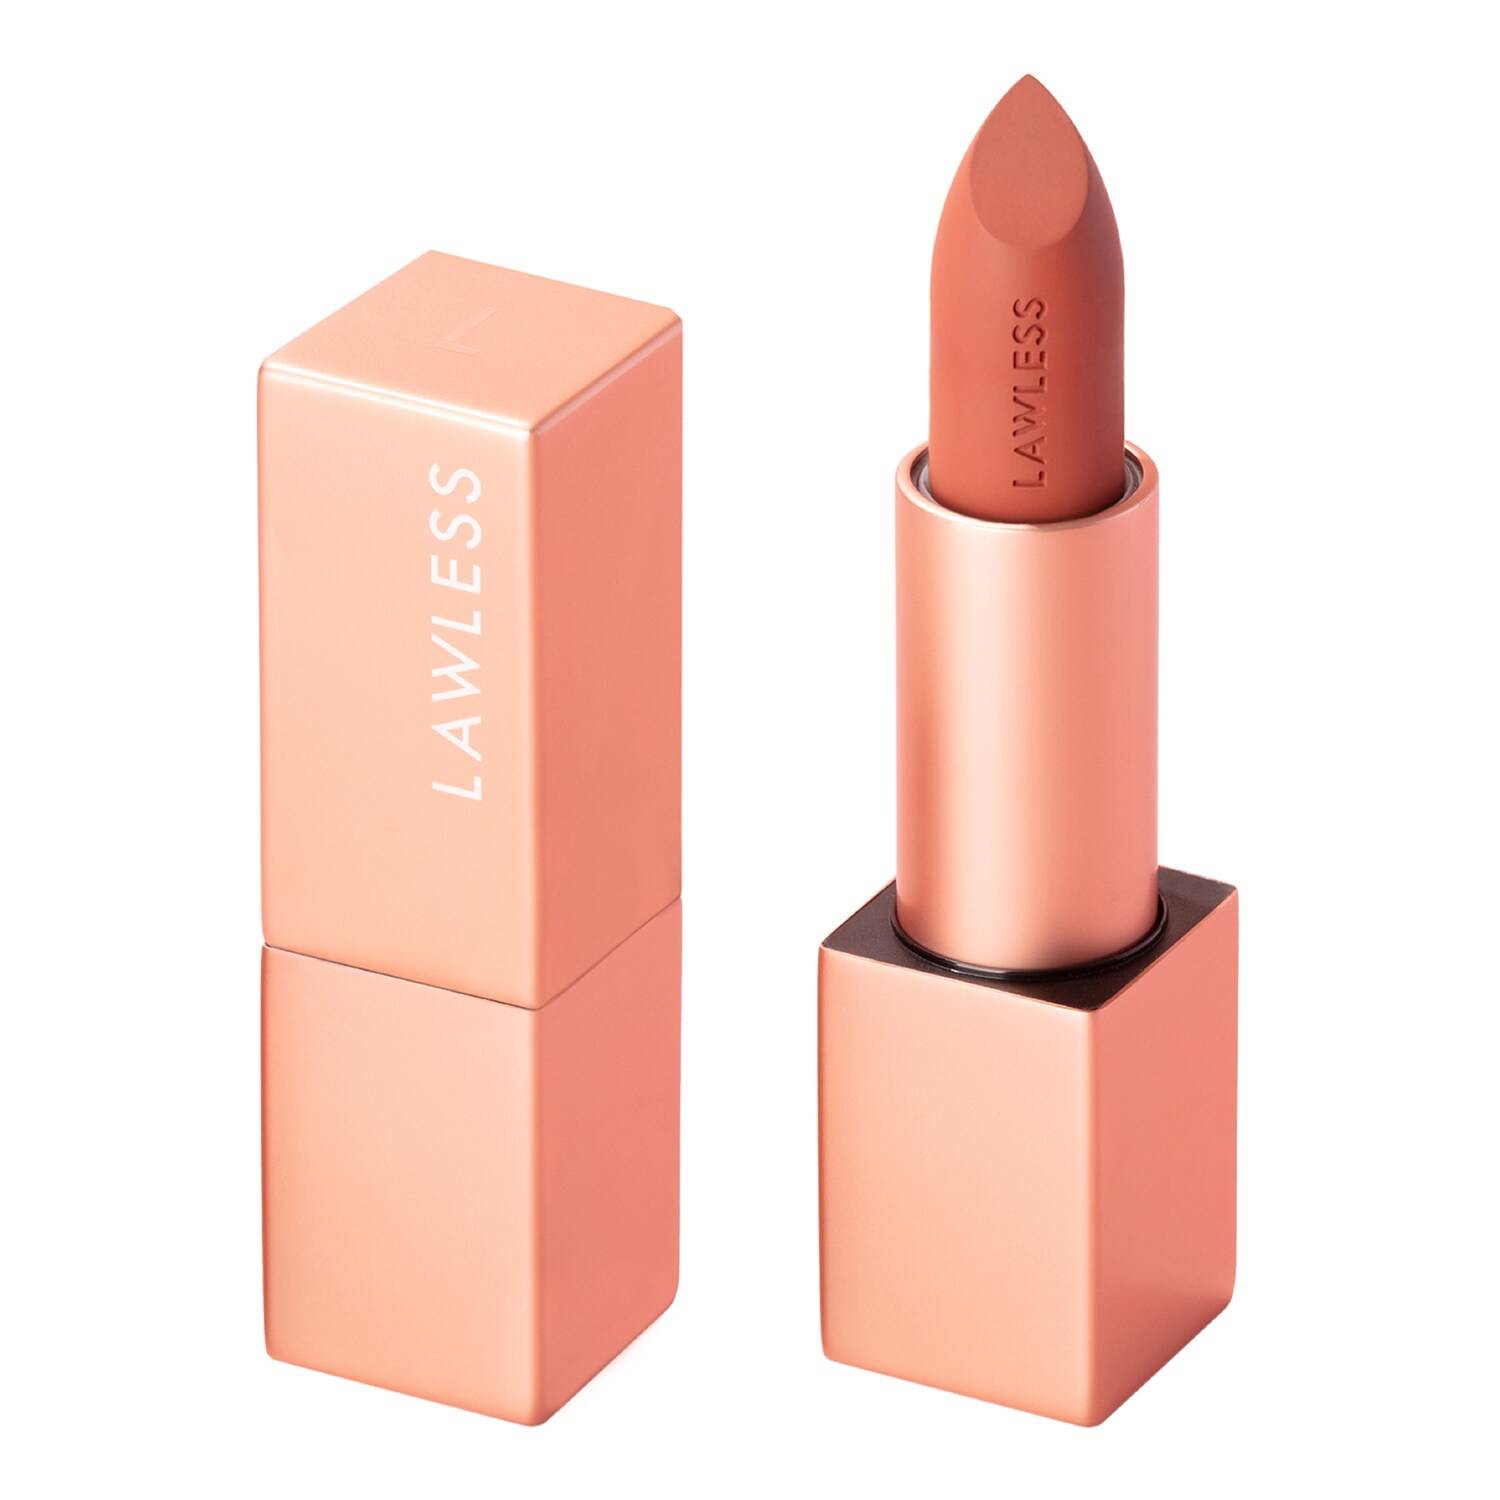 Lawless Beauty Forget The Filler Lip Plumping Line-Smoothing Satin Cream Lipstick 3.7G Cookie